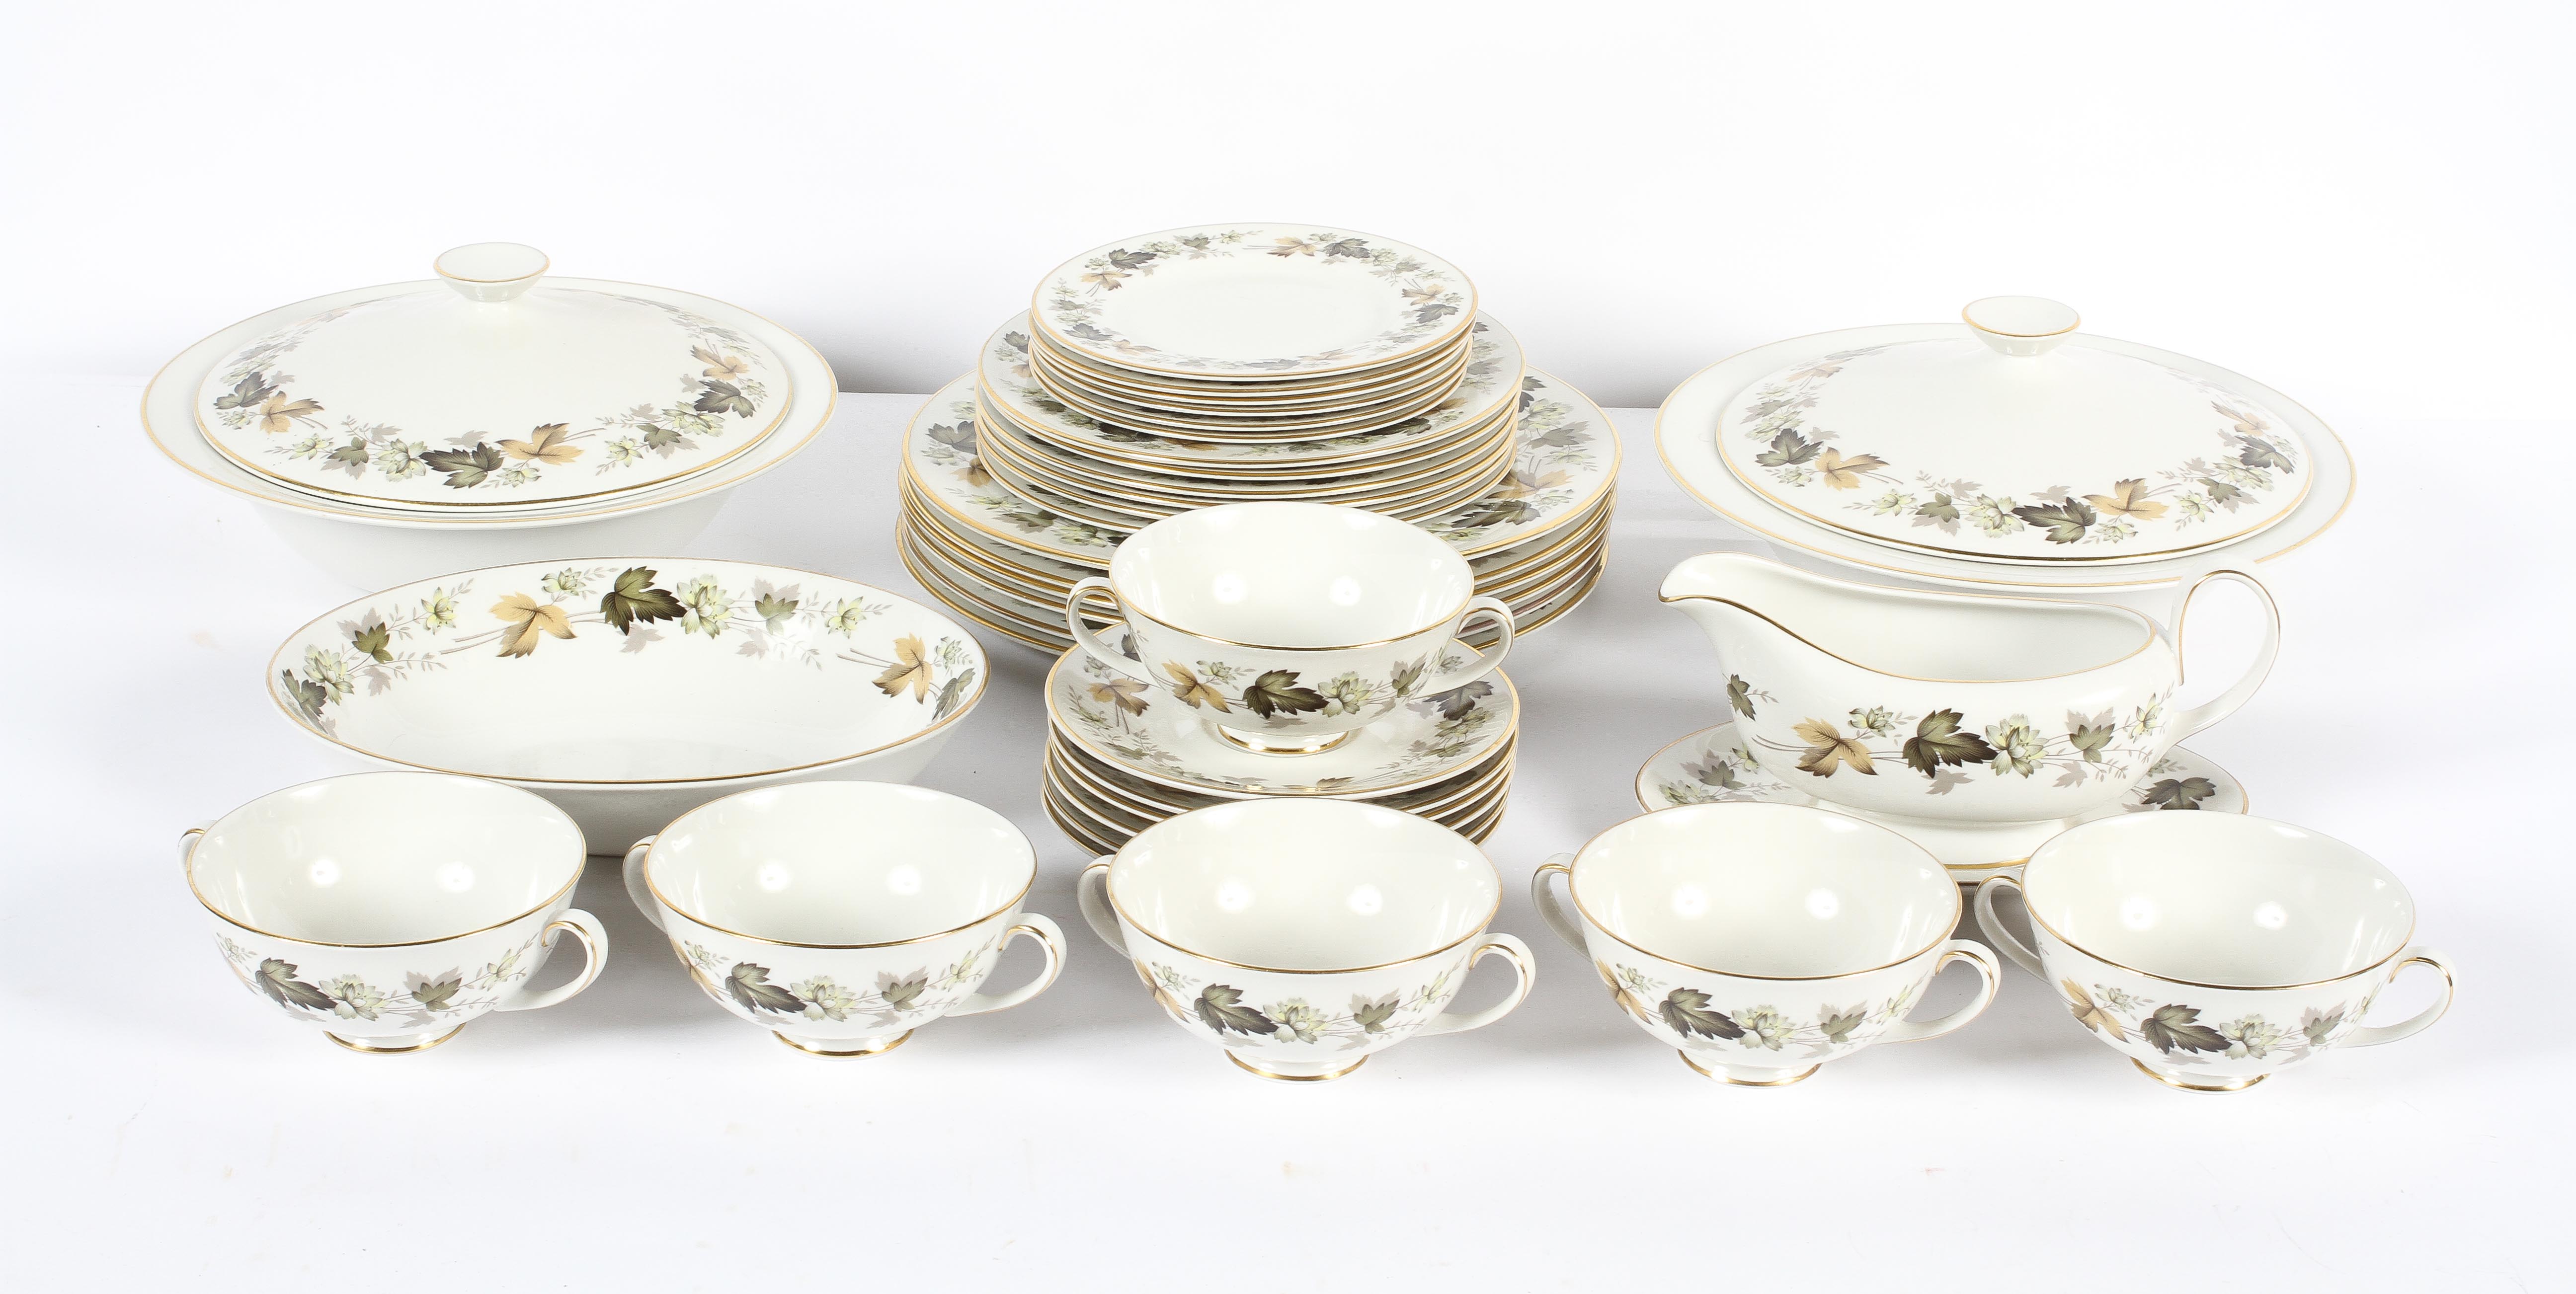 A Royal Doulton 'Larchmont' pattern part dinner service, 20th century, printed grey marks, - Image 3 of 3